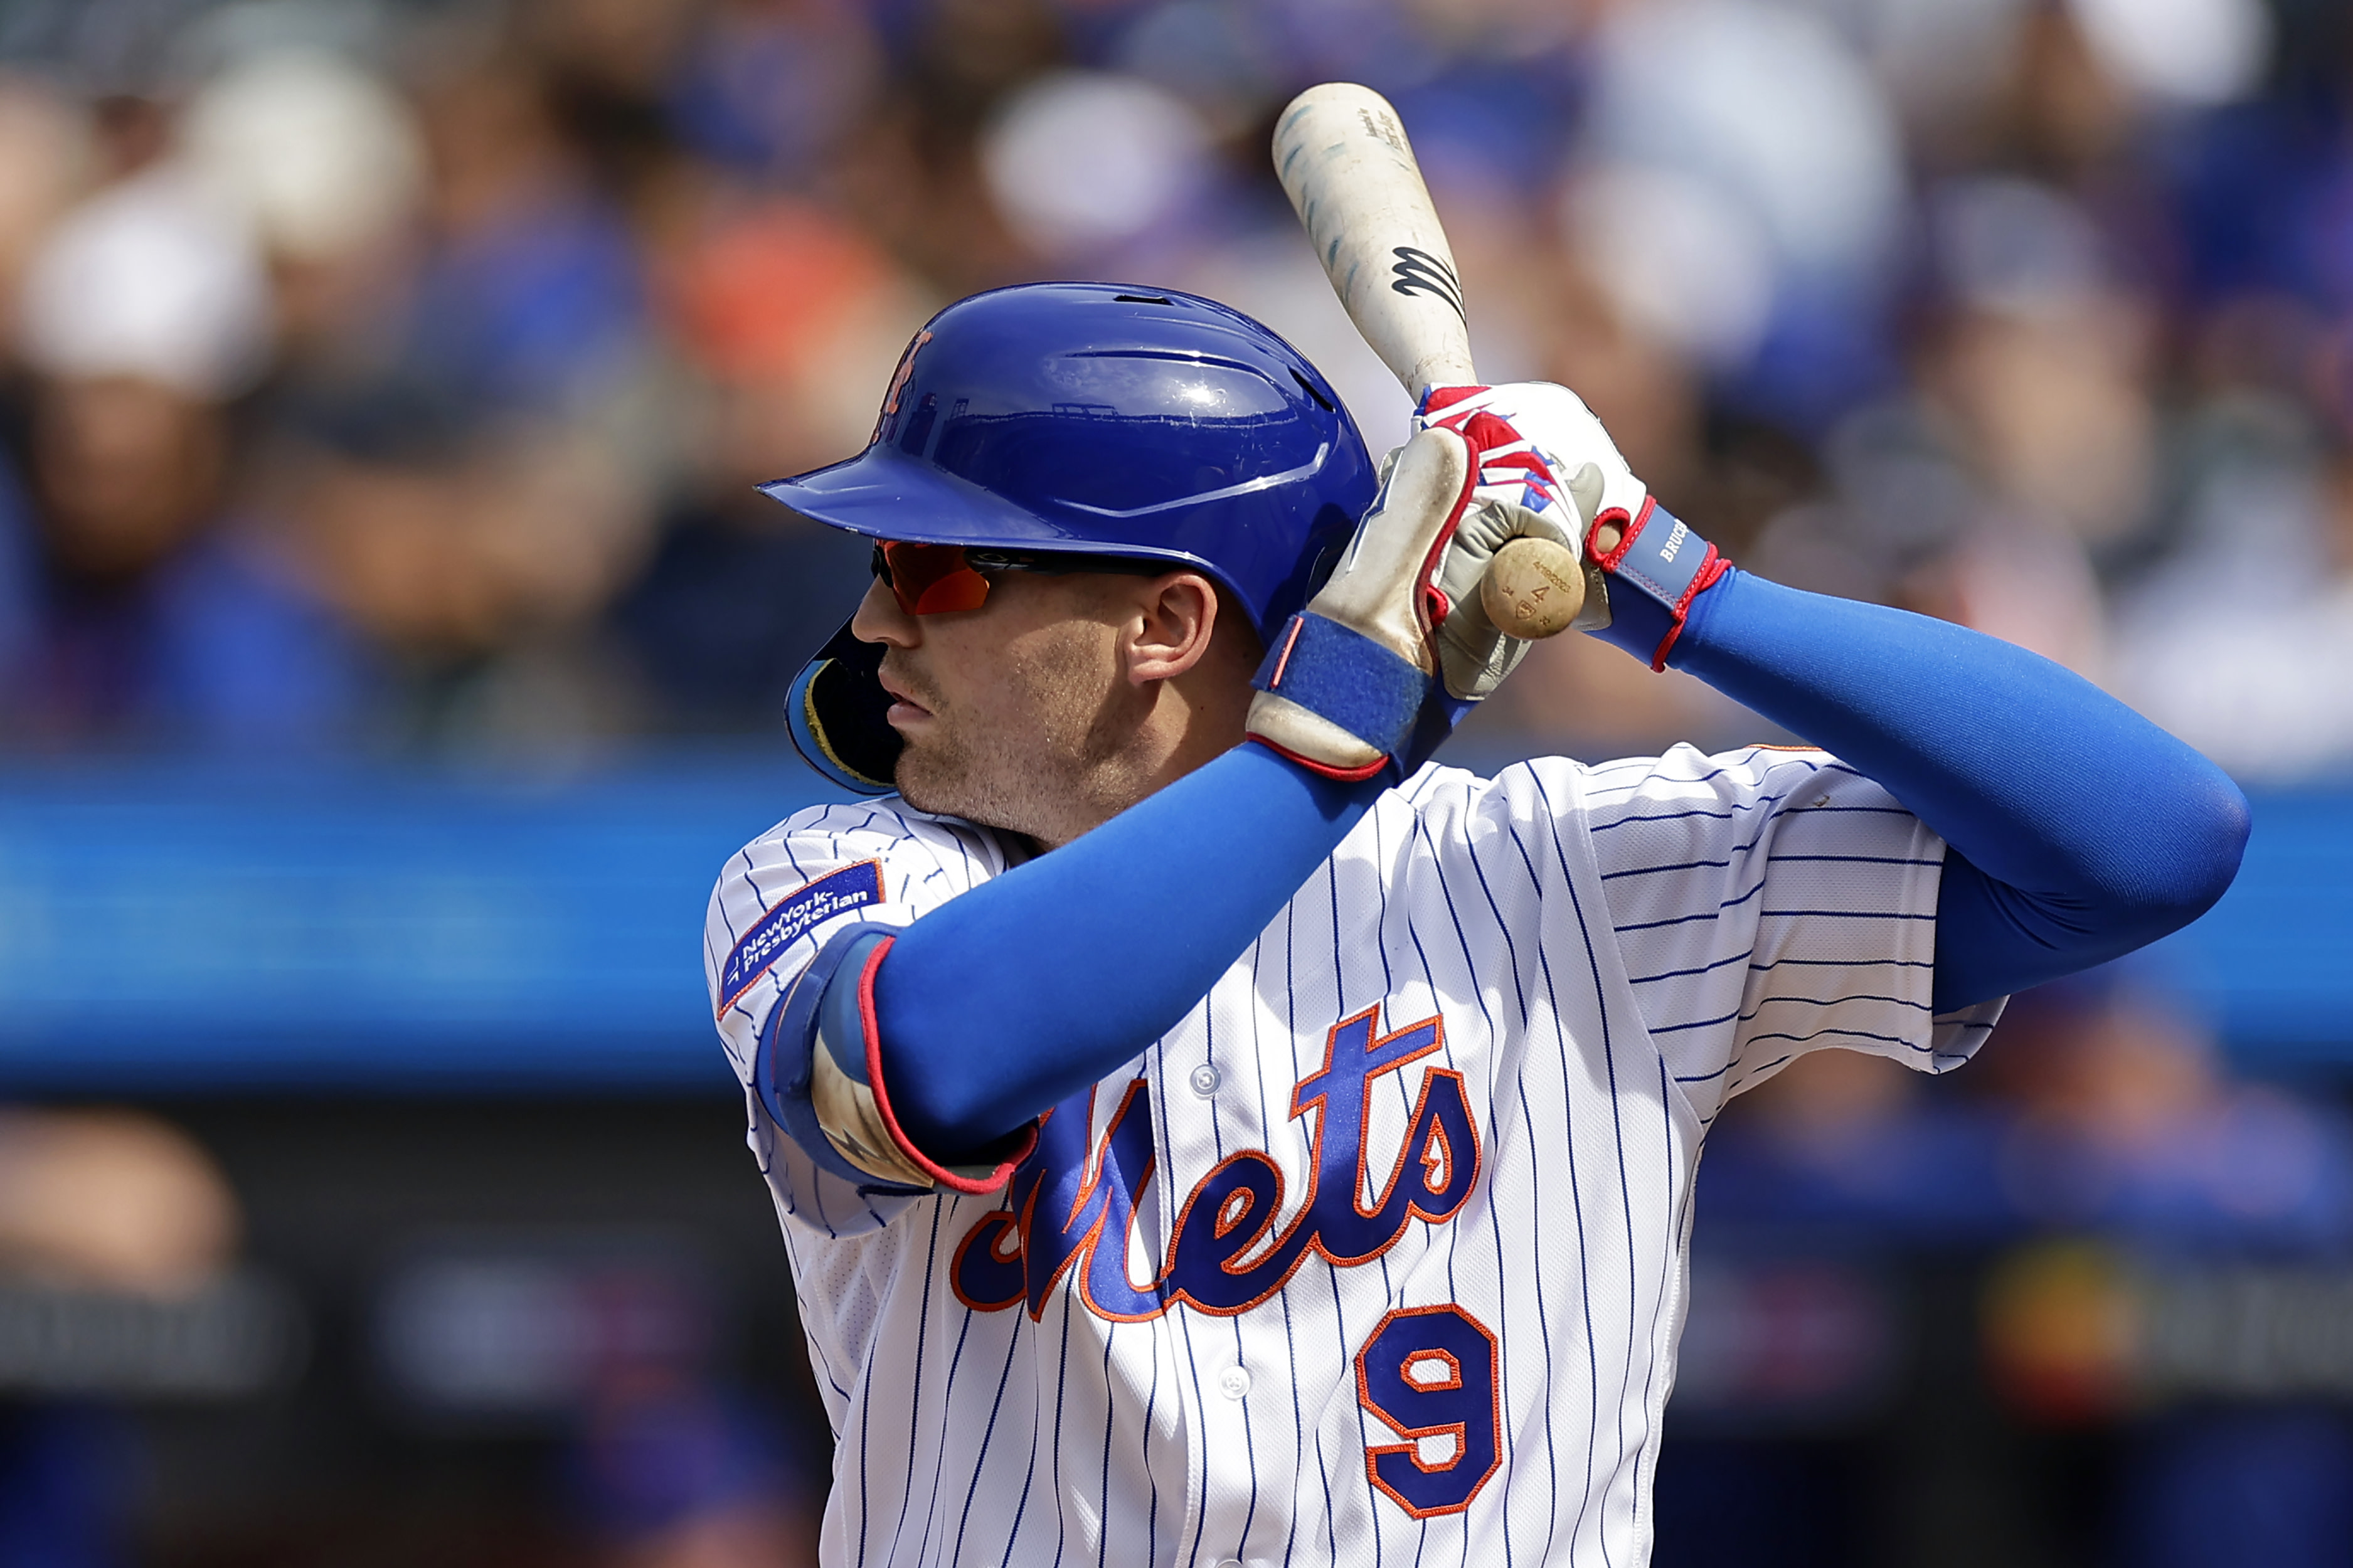 Mets' Pete Alonso Met With Owner Steve Cohen amid MLB Trade Rumors